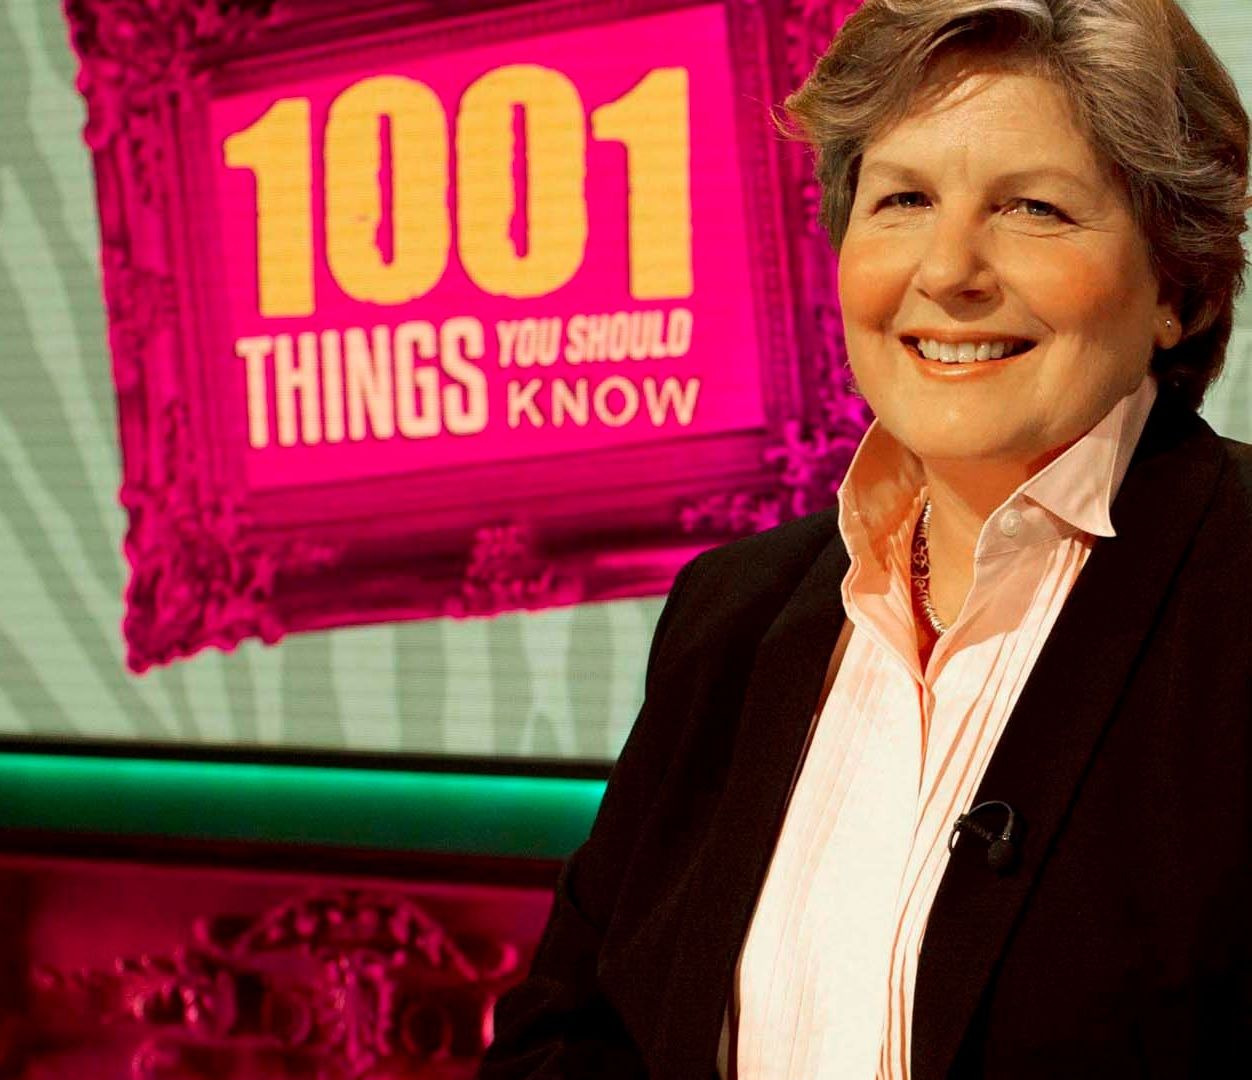 Show 1001 Things You Should Know